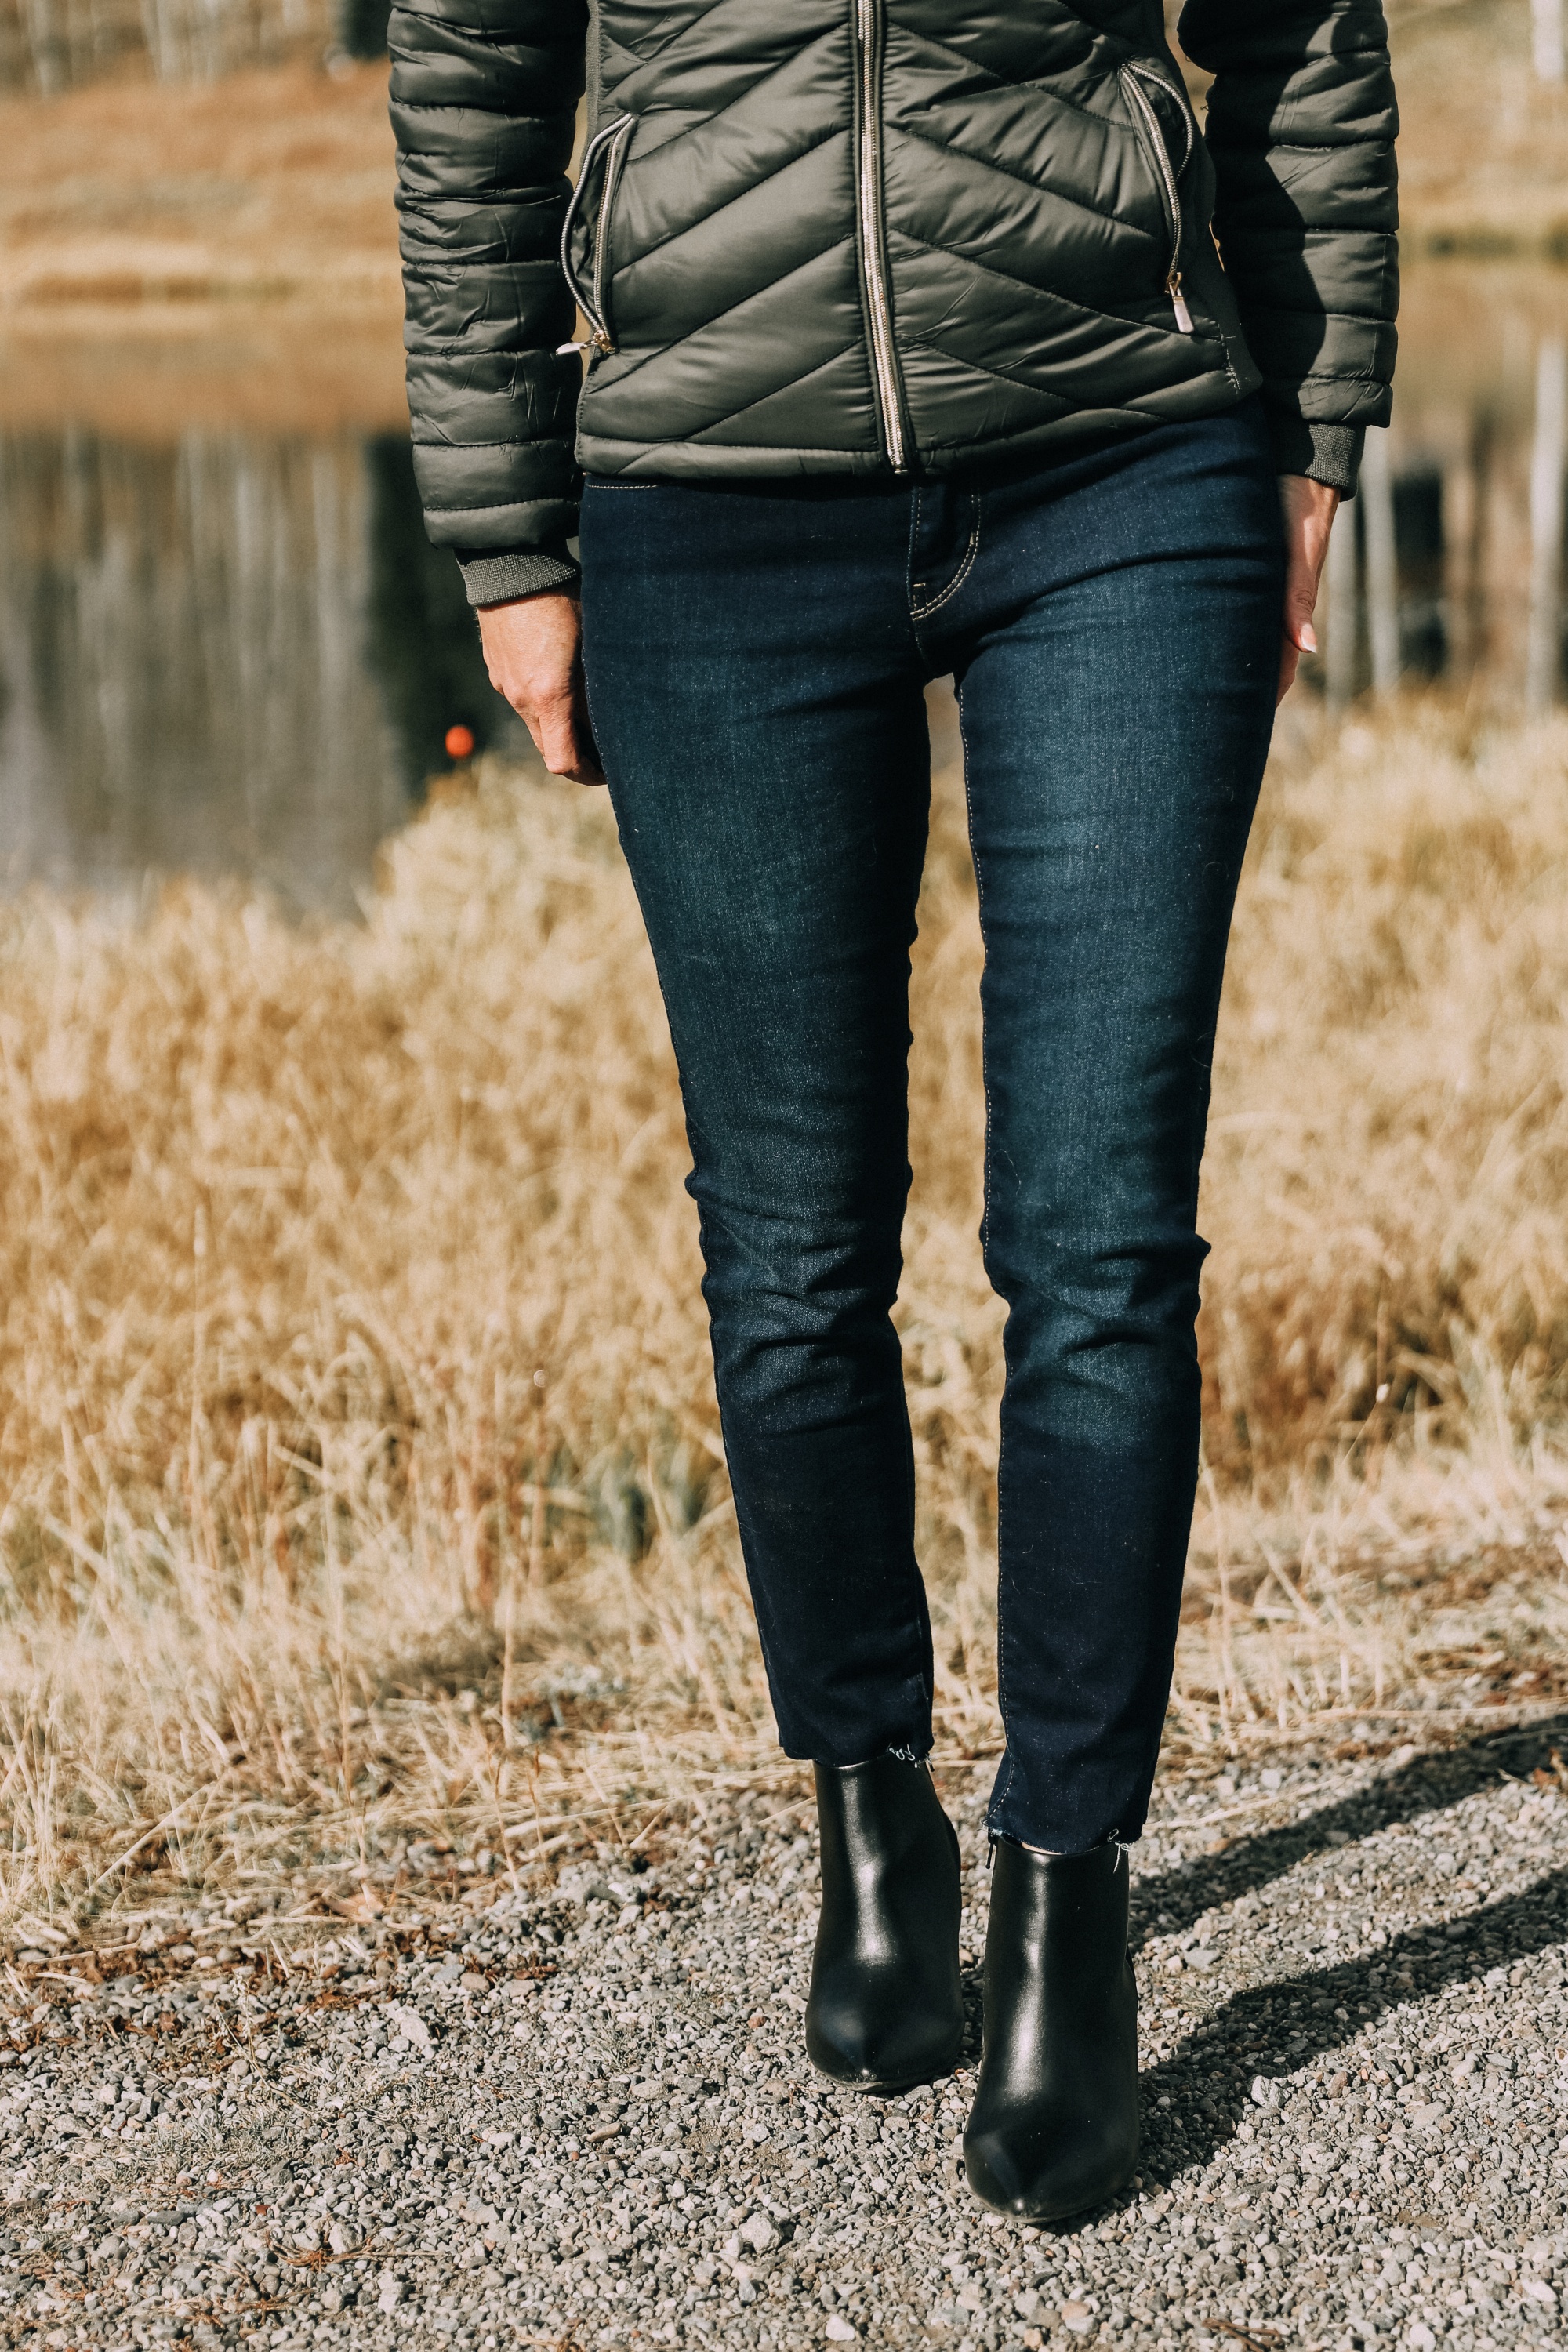 skinny jeans paired with black heeled booties